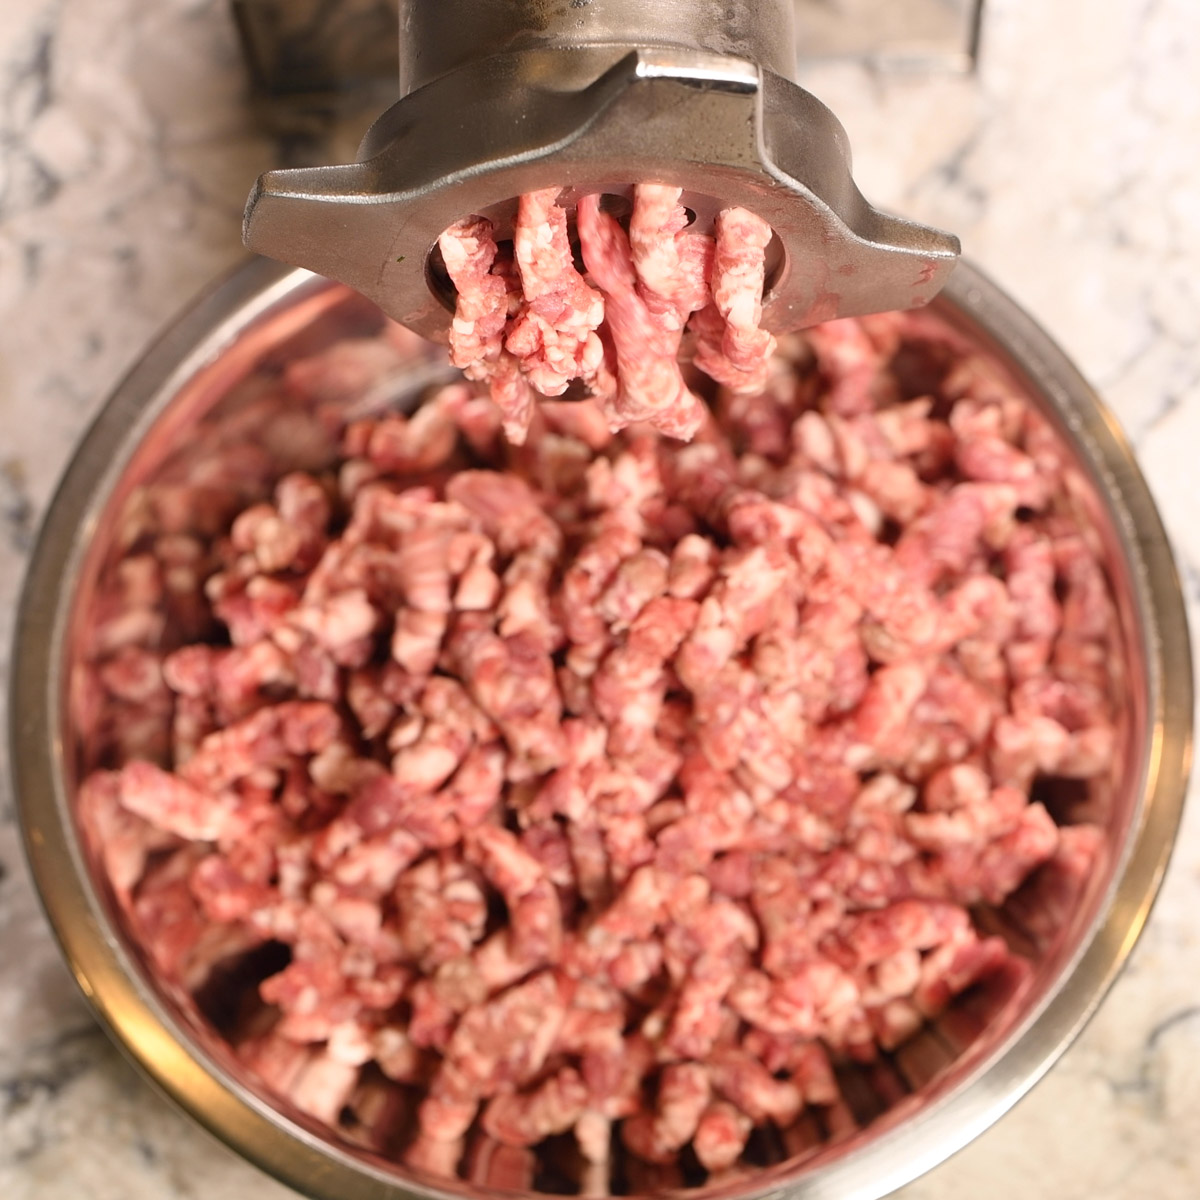 Grind the meat using a course grinding plate.